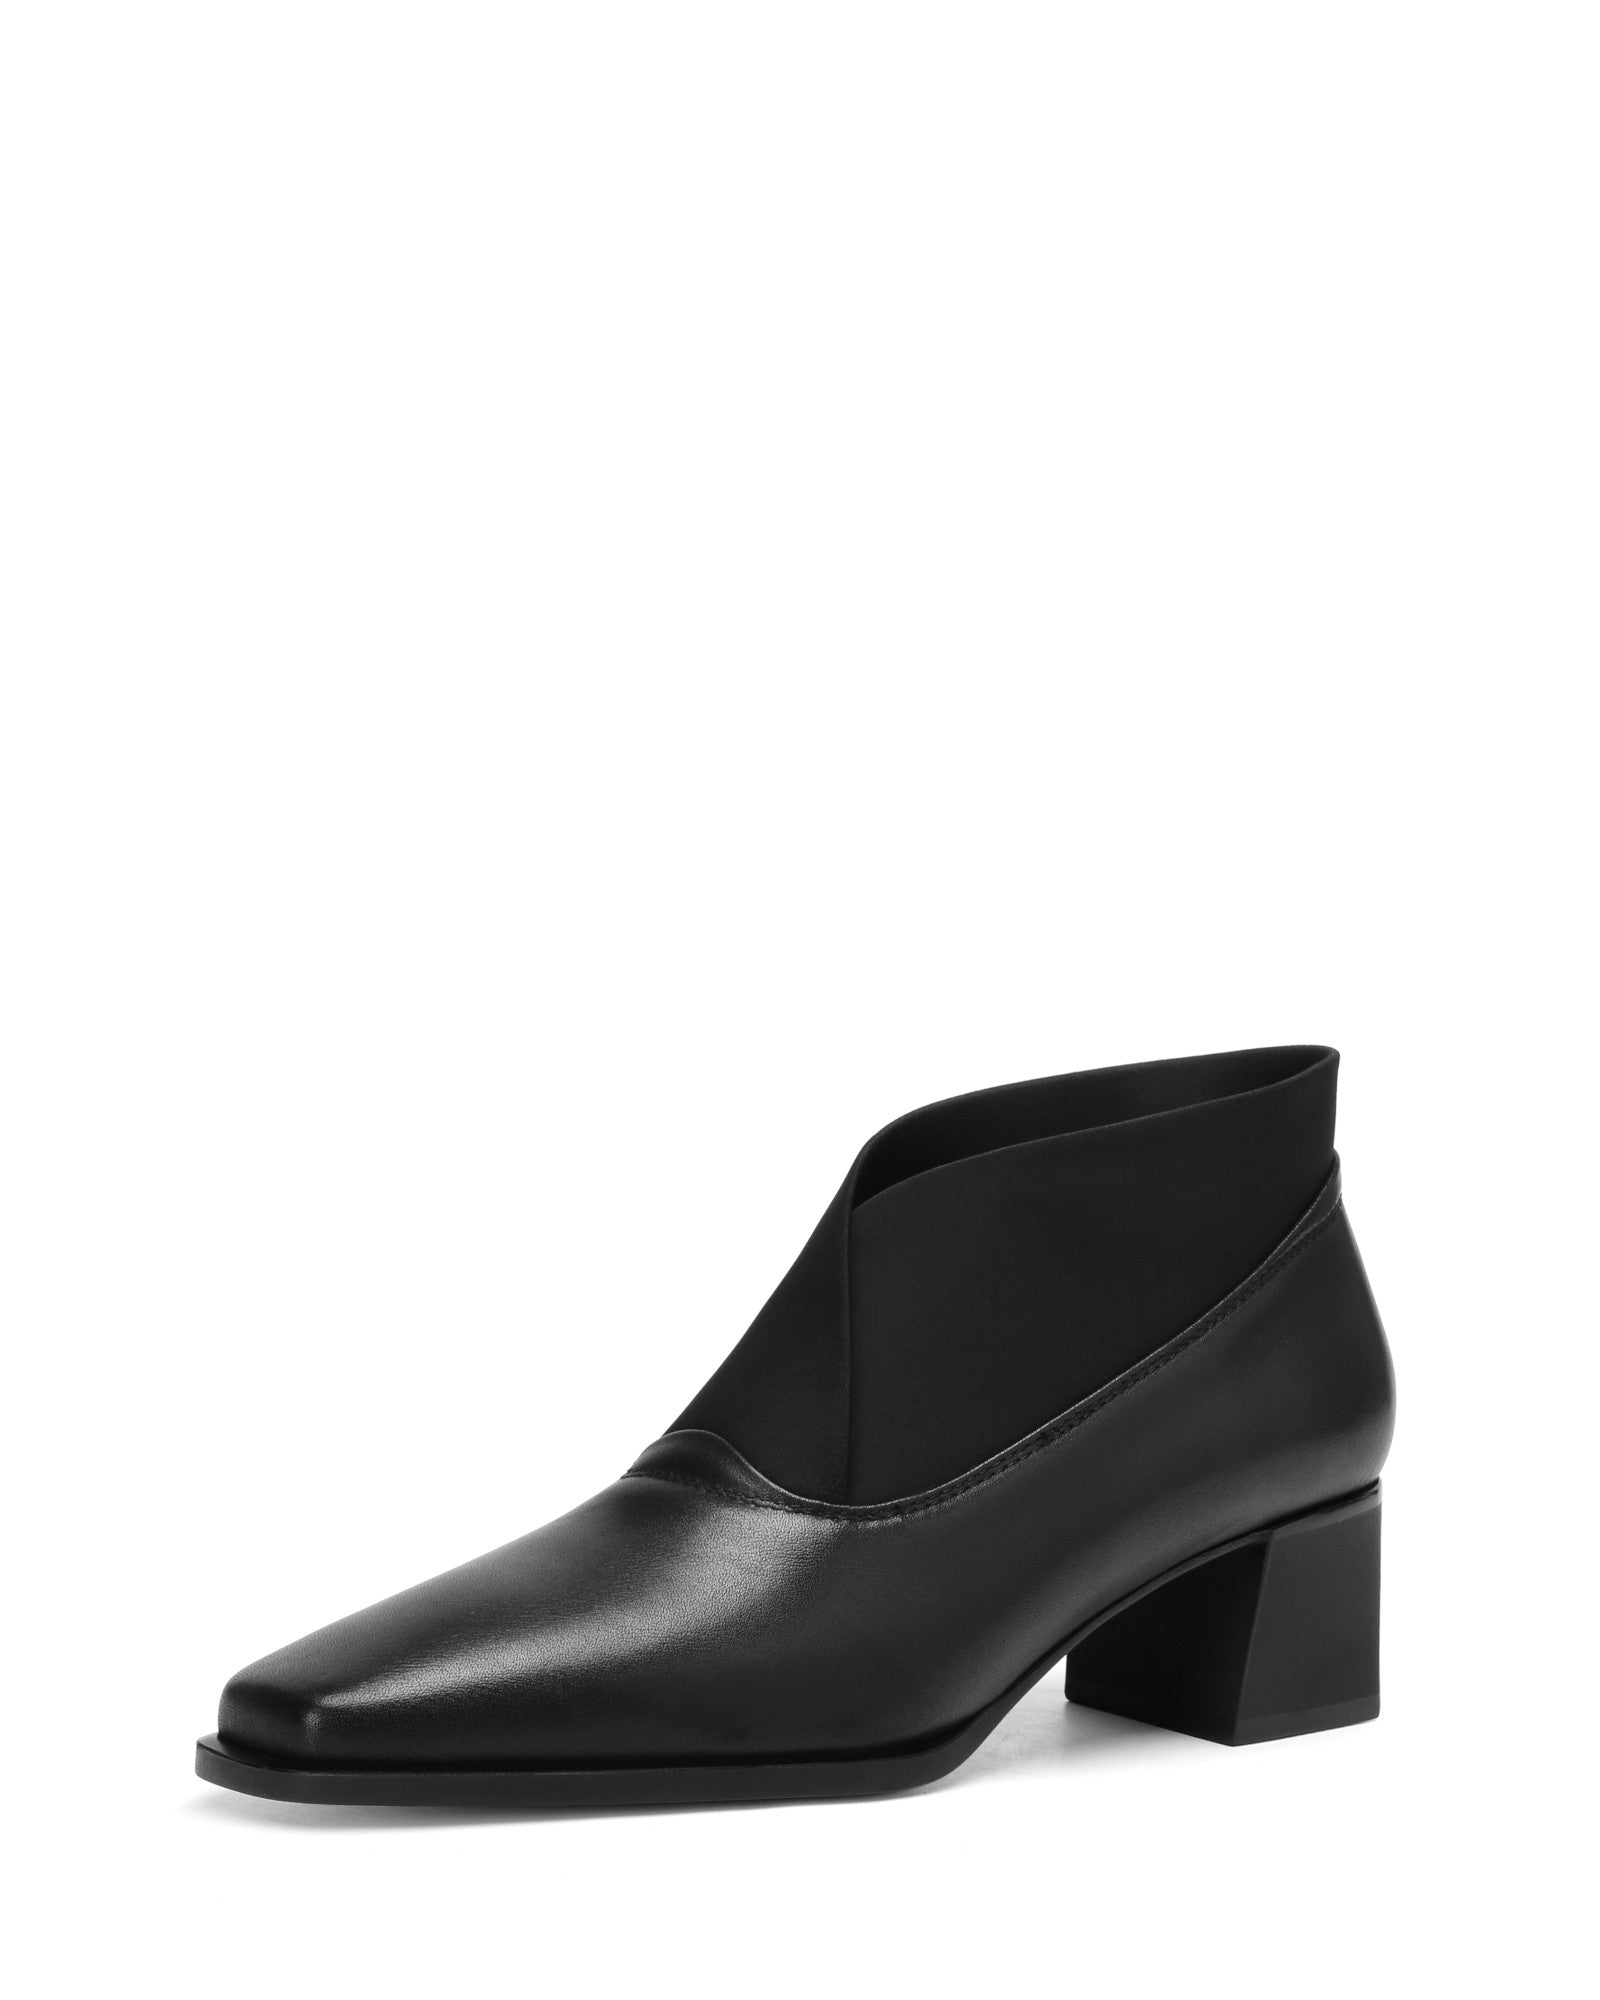 Riana-Black-Leather-Ankle-Boots